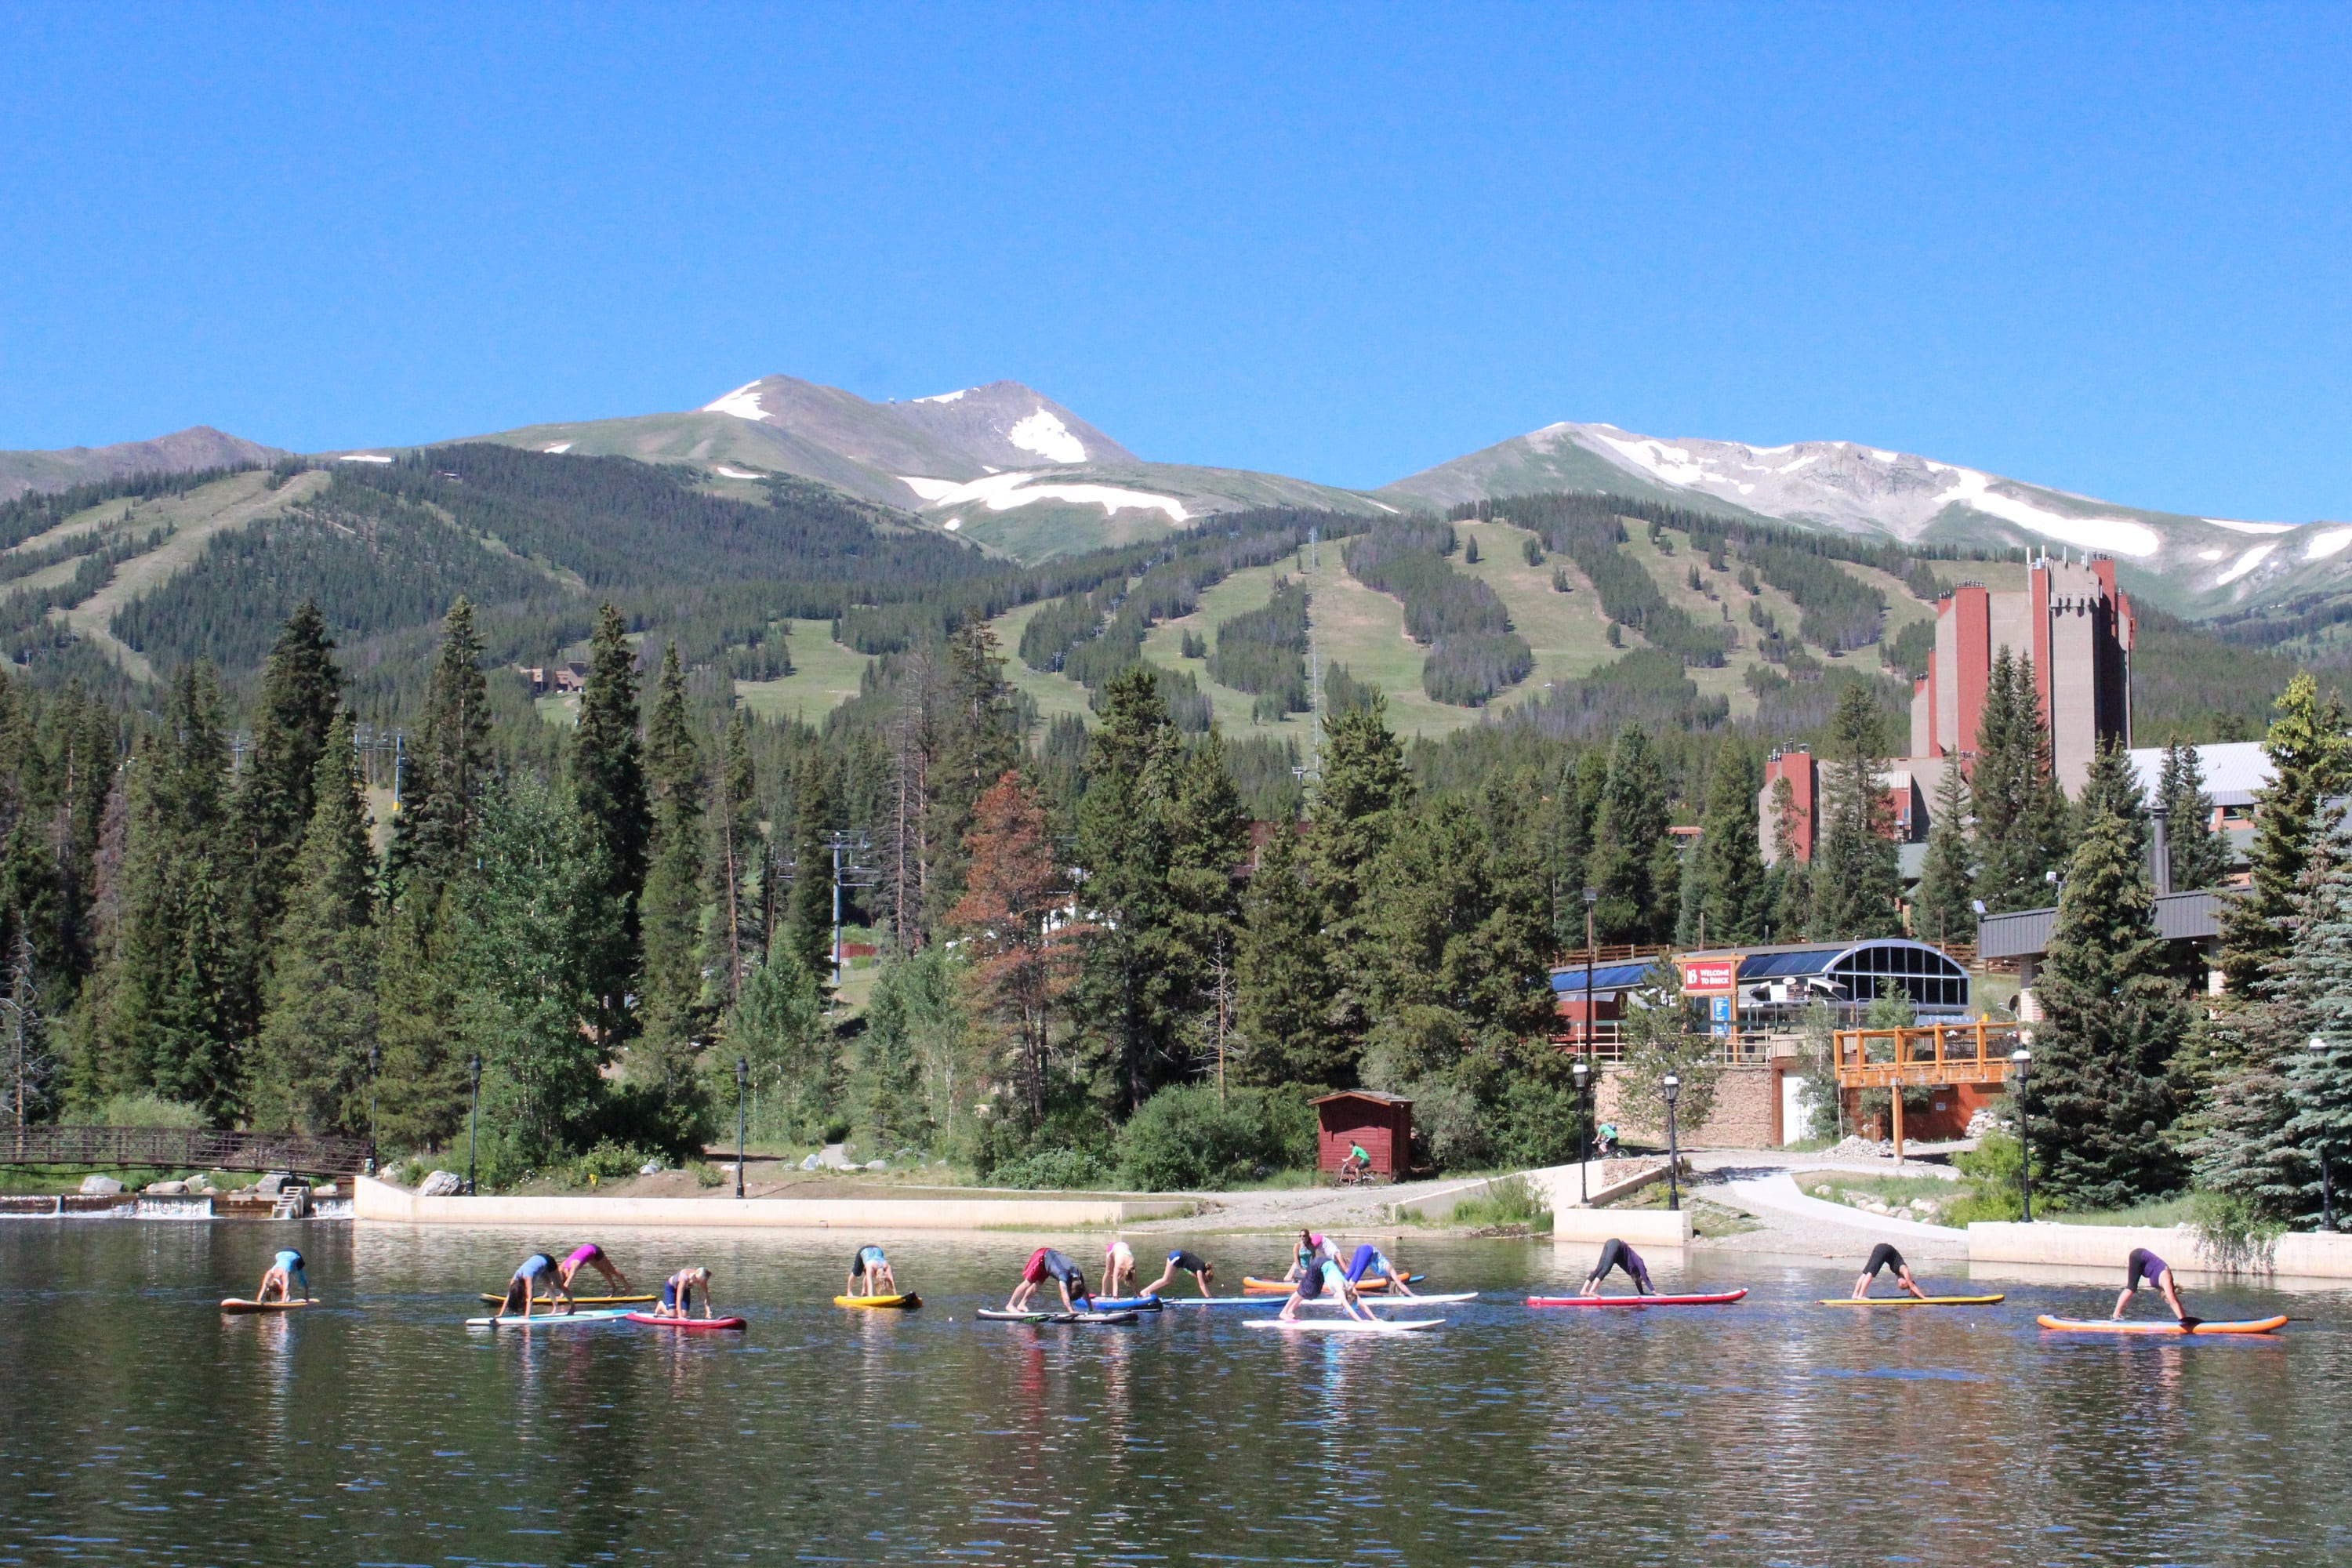 Yoga class practices yoga on a paddleboard in Breckenridge, CO